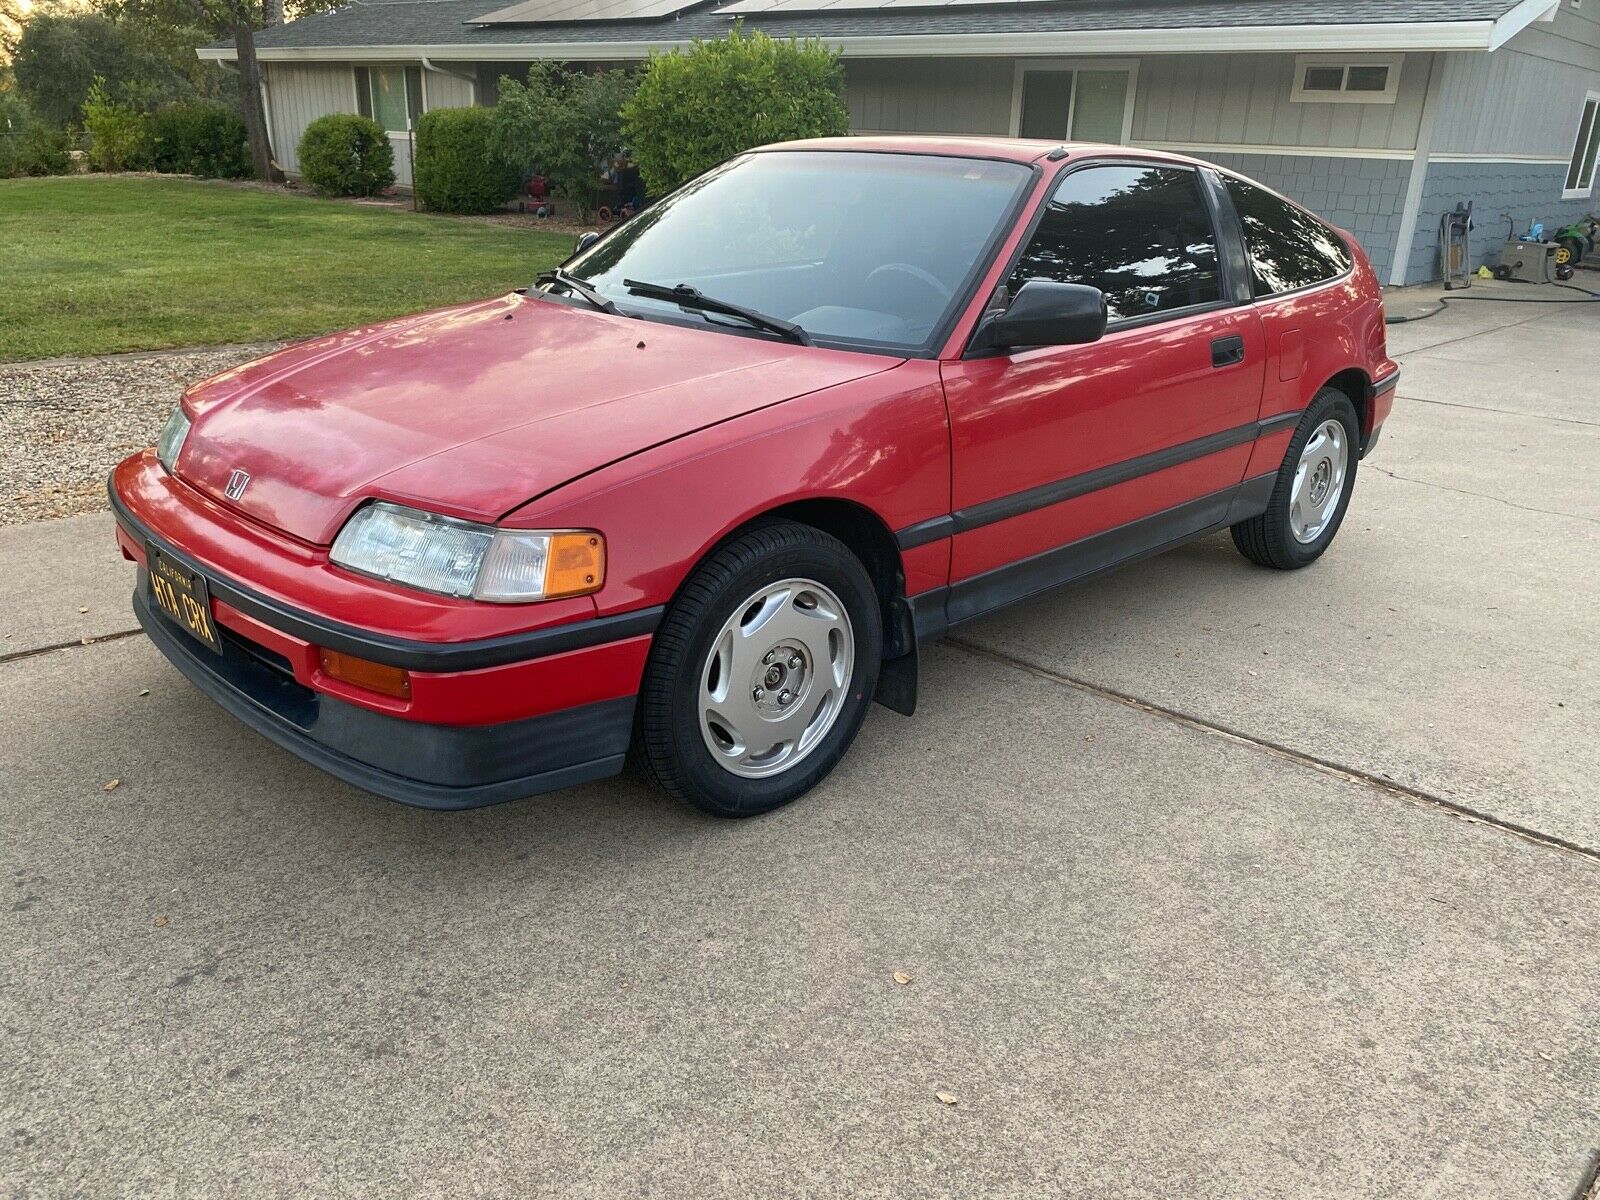 1989 Honda Crx  Low Original Miles_well Cared For_excellent Condition For Age_some Paint Issues